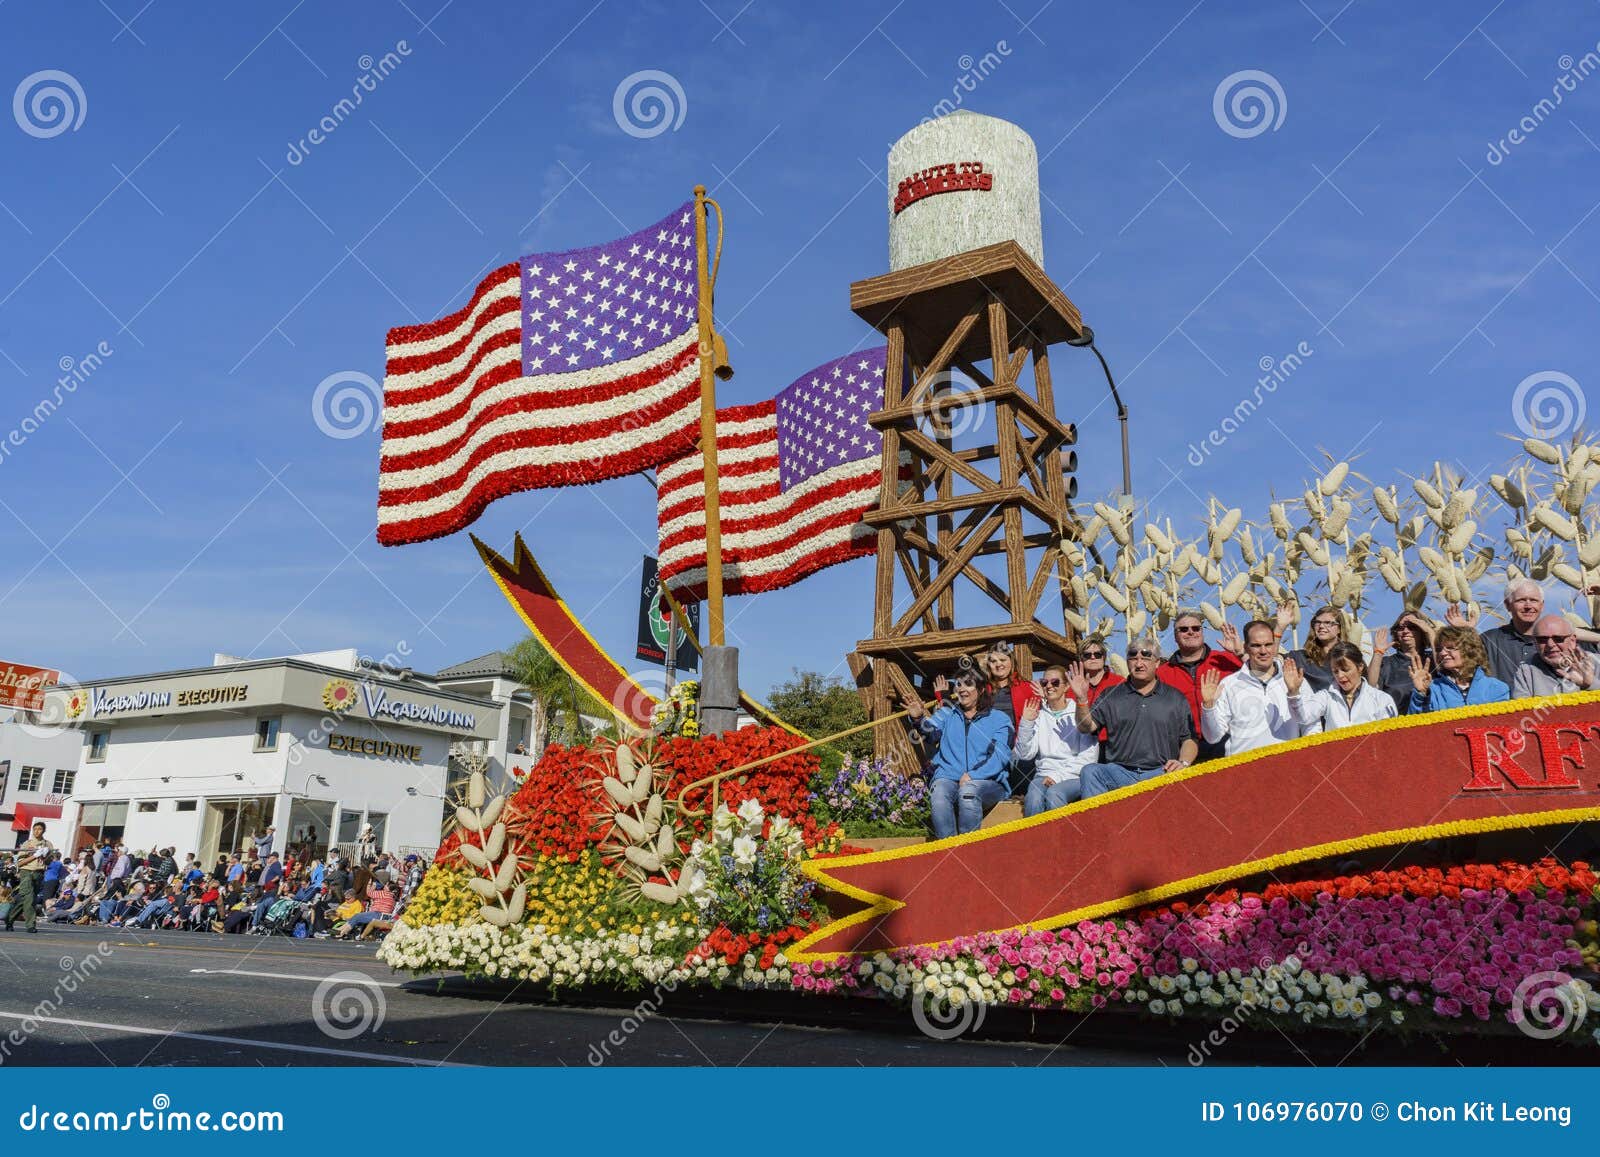 wrigley legacy award float in the famous rose parade